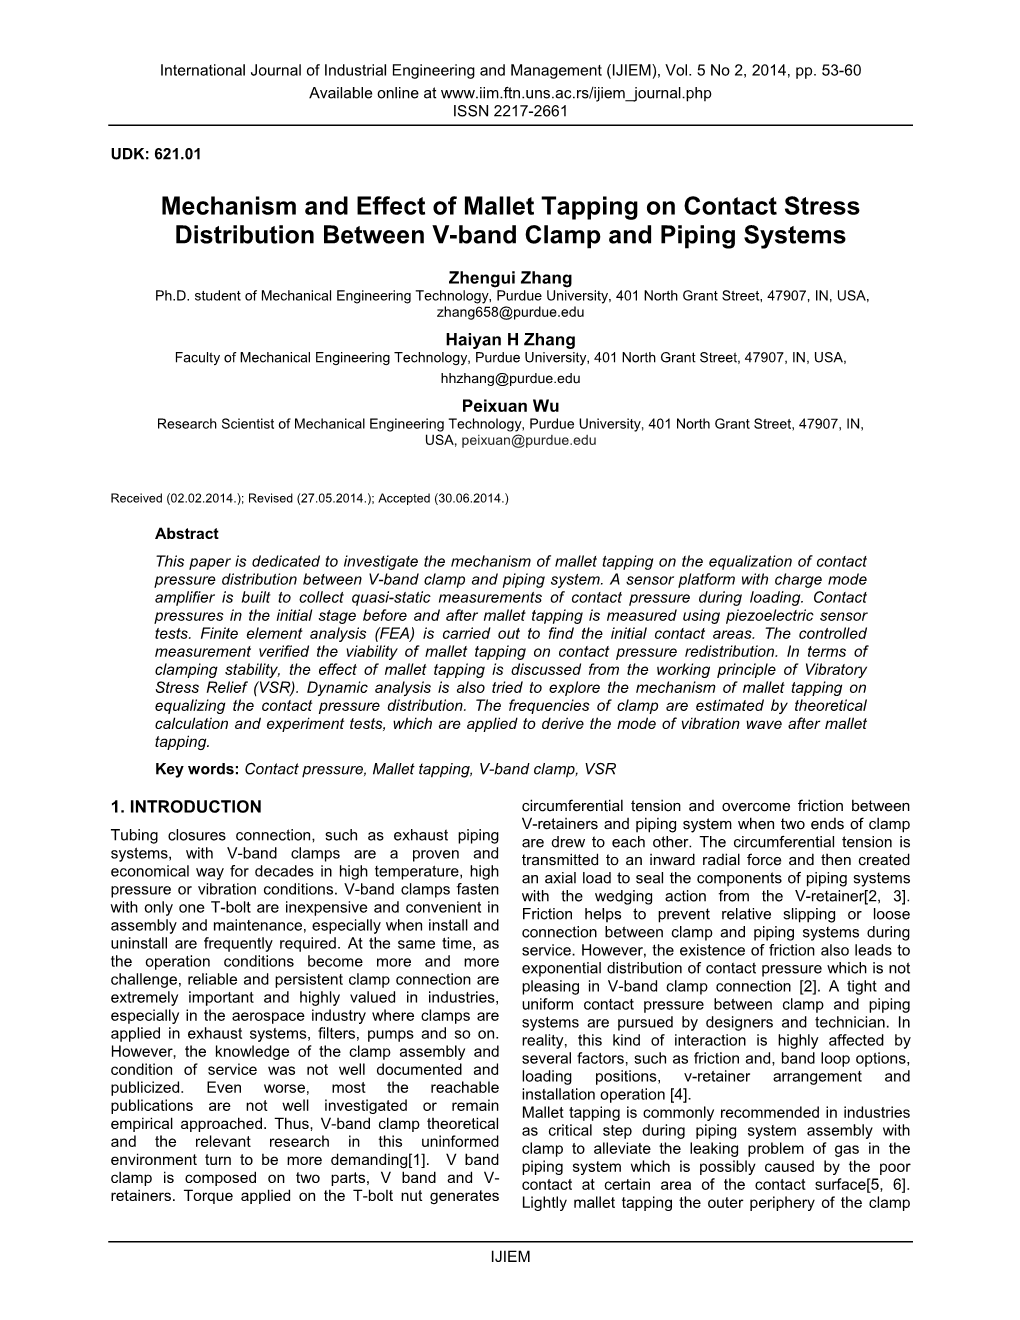 Mechanism and Effect of Mallet Tapping on Contact Stress Distribution Between V-Band Clamp and Piping Systems